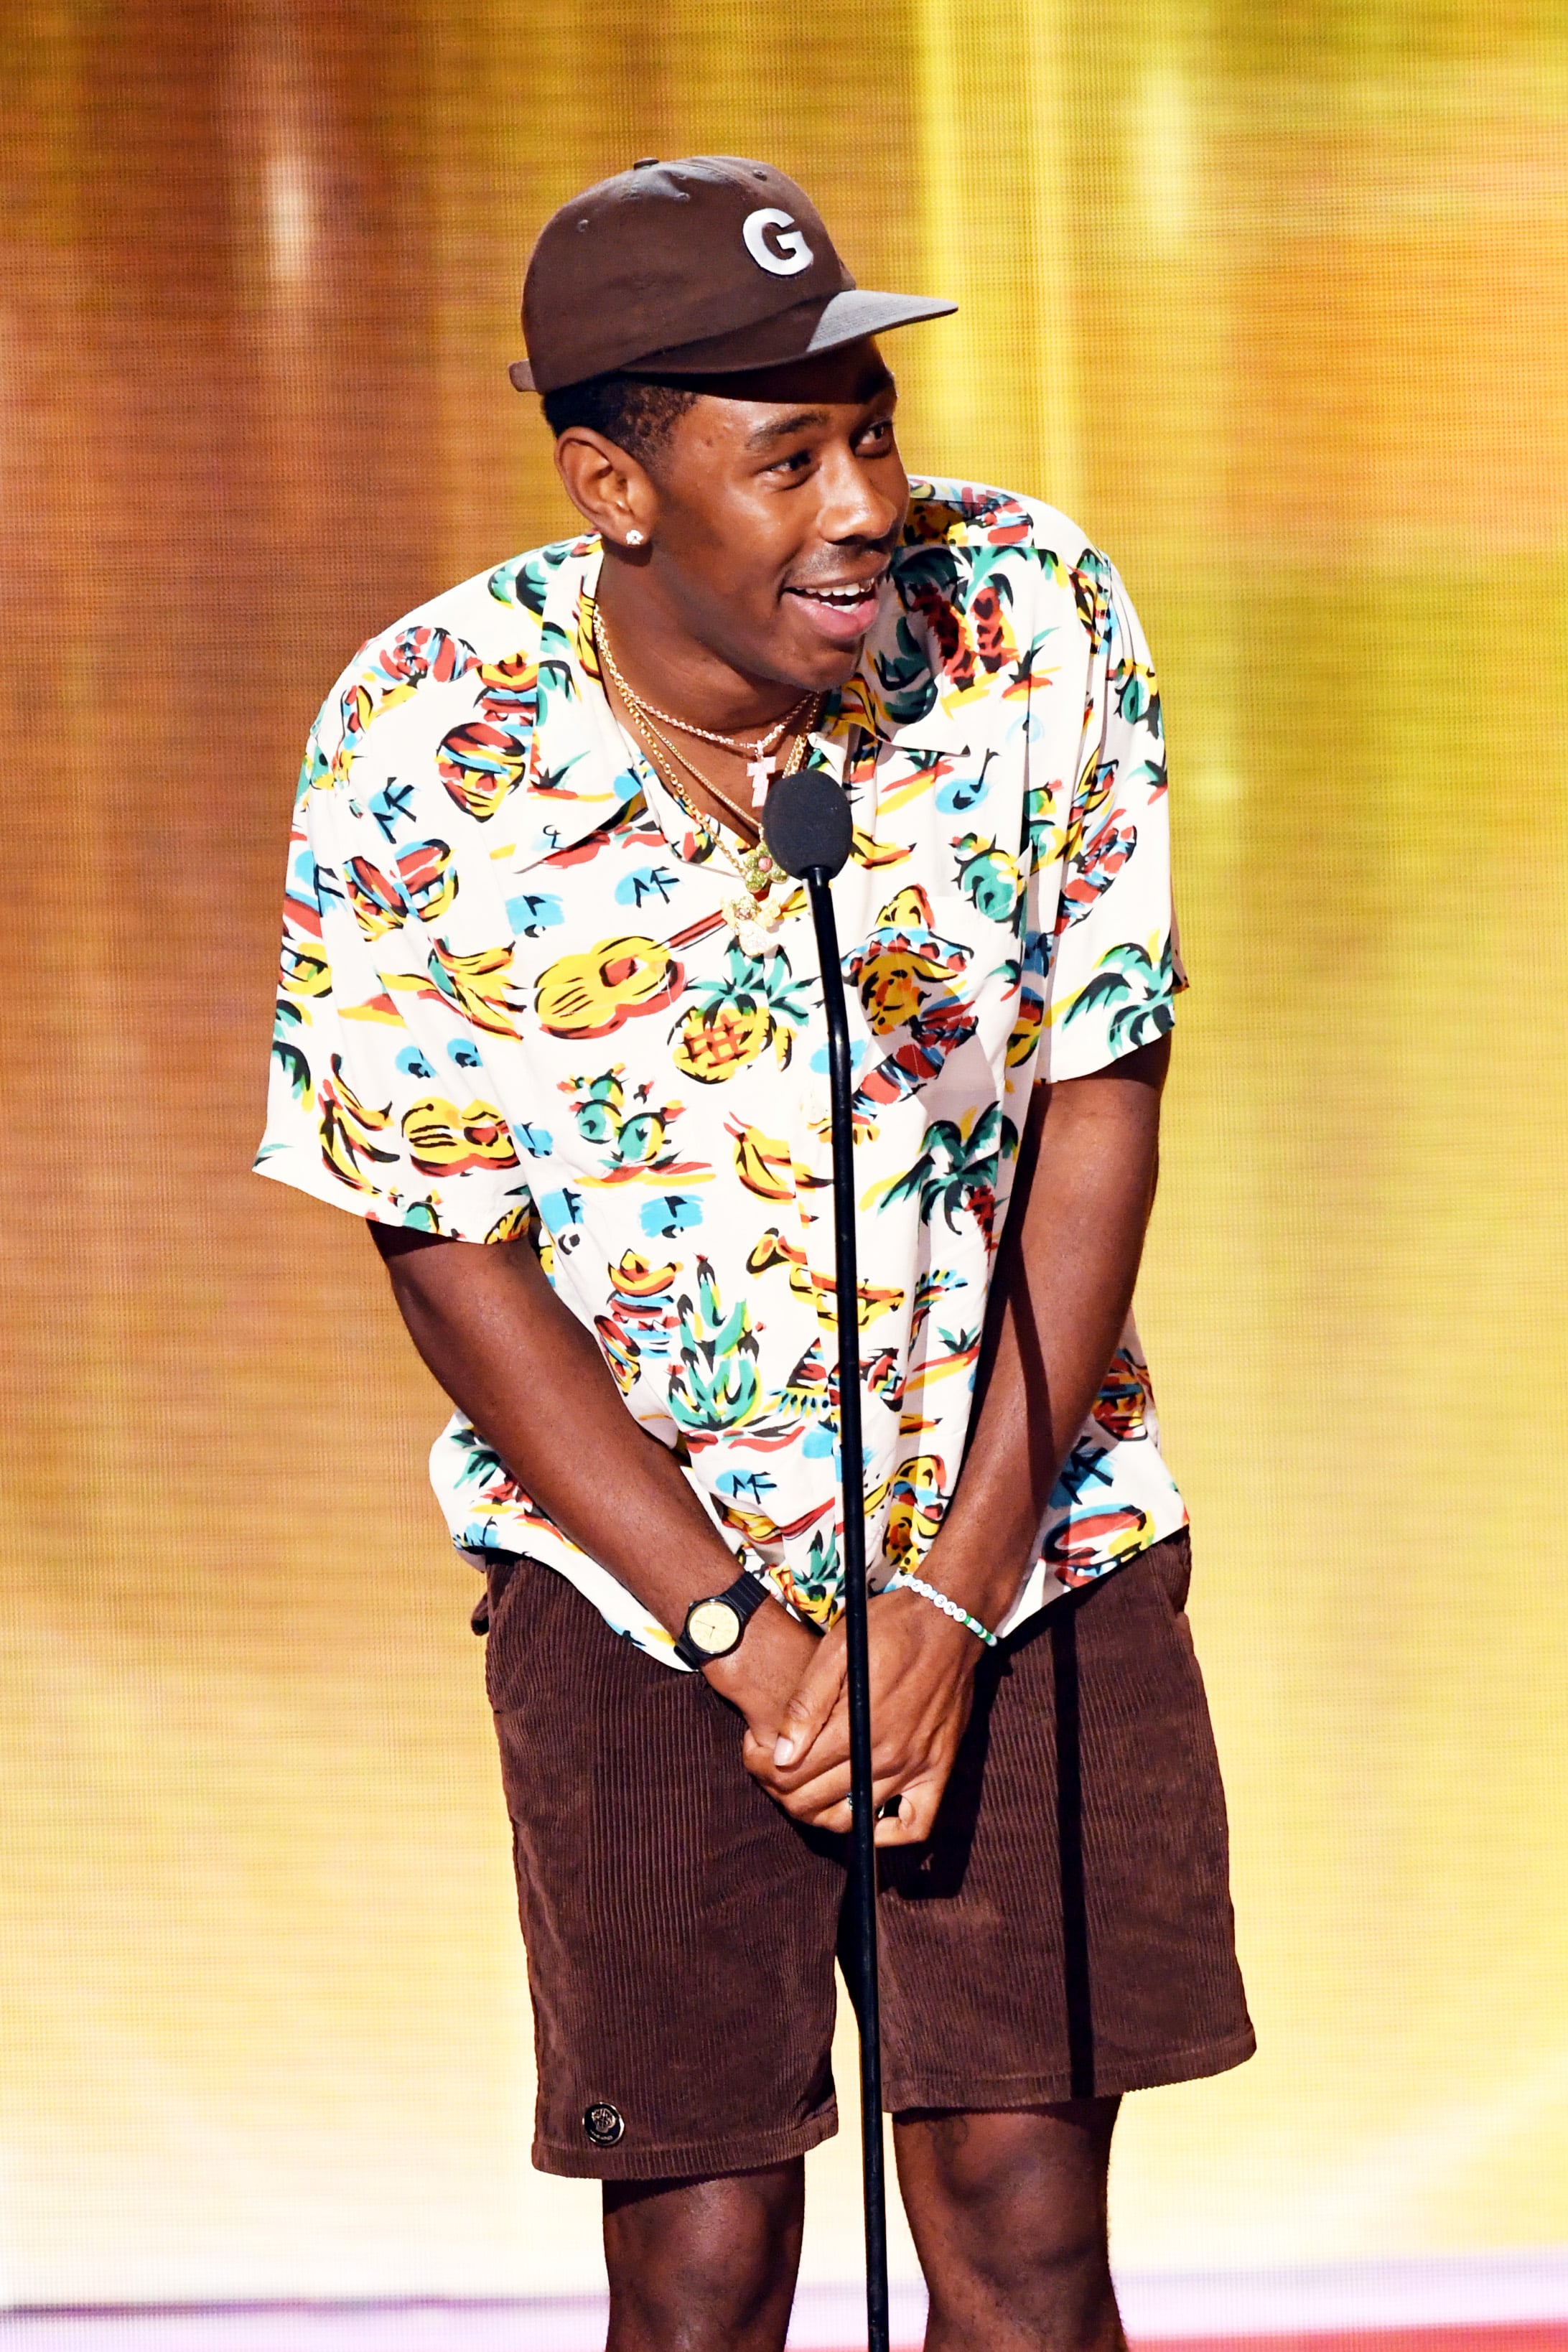 A Recap of Tyler the Creator's Style Throughout The Years – Rvce News